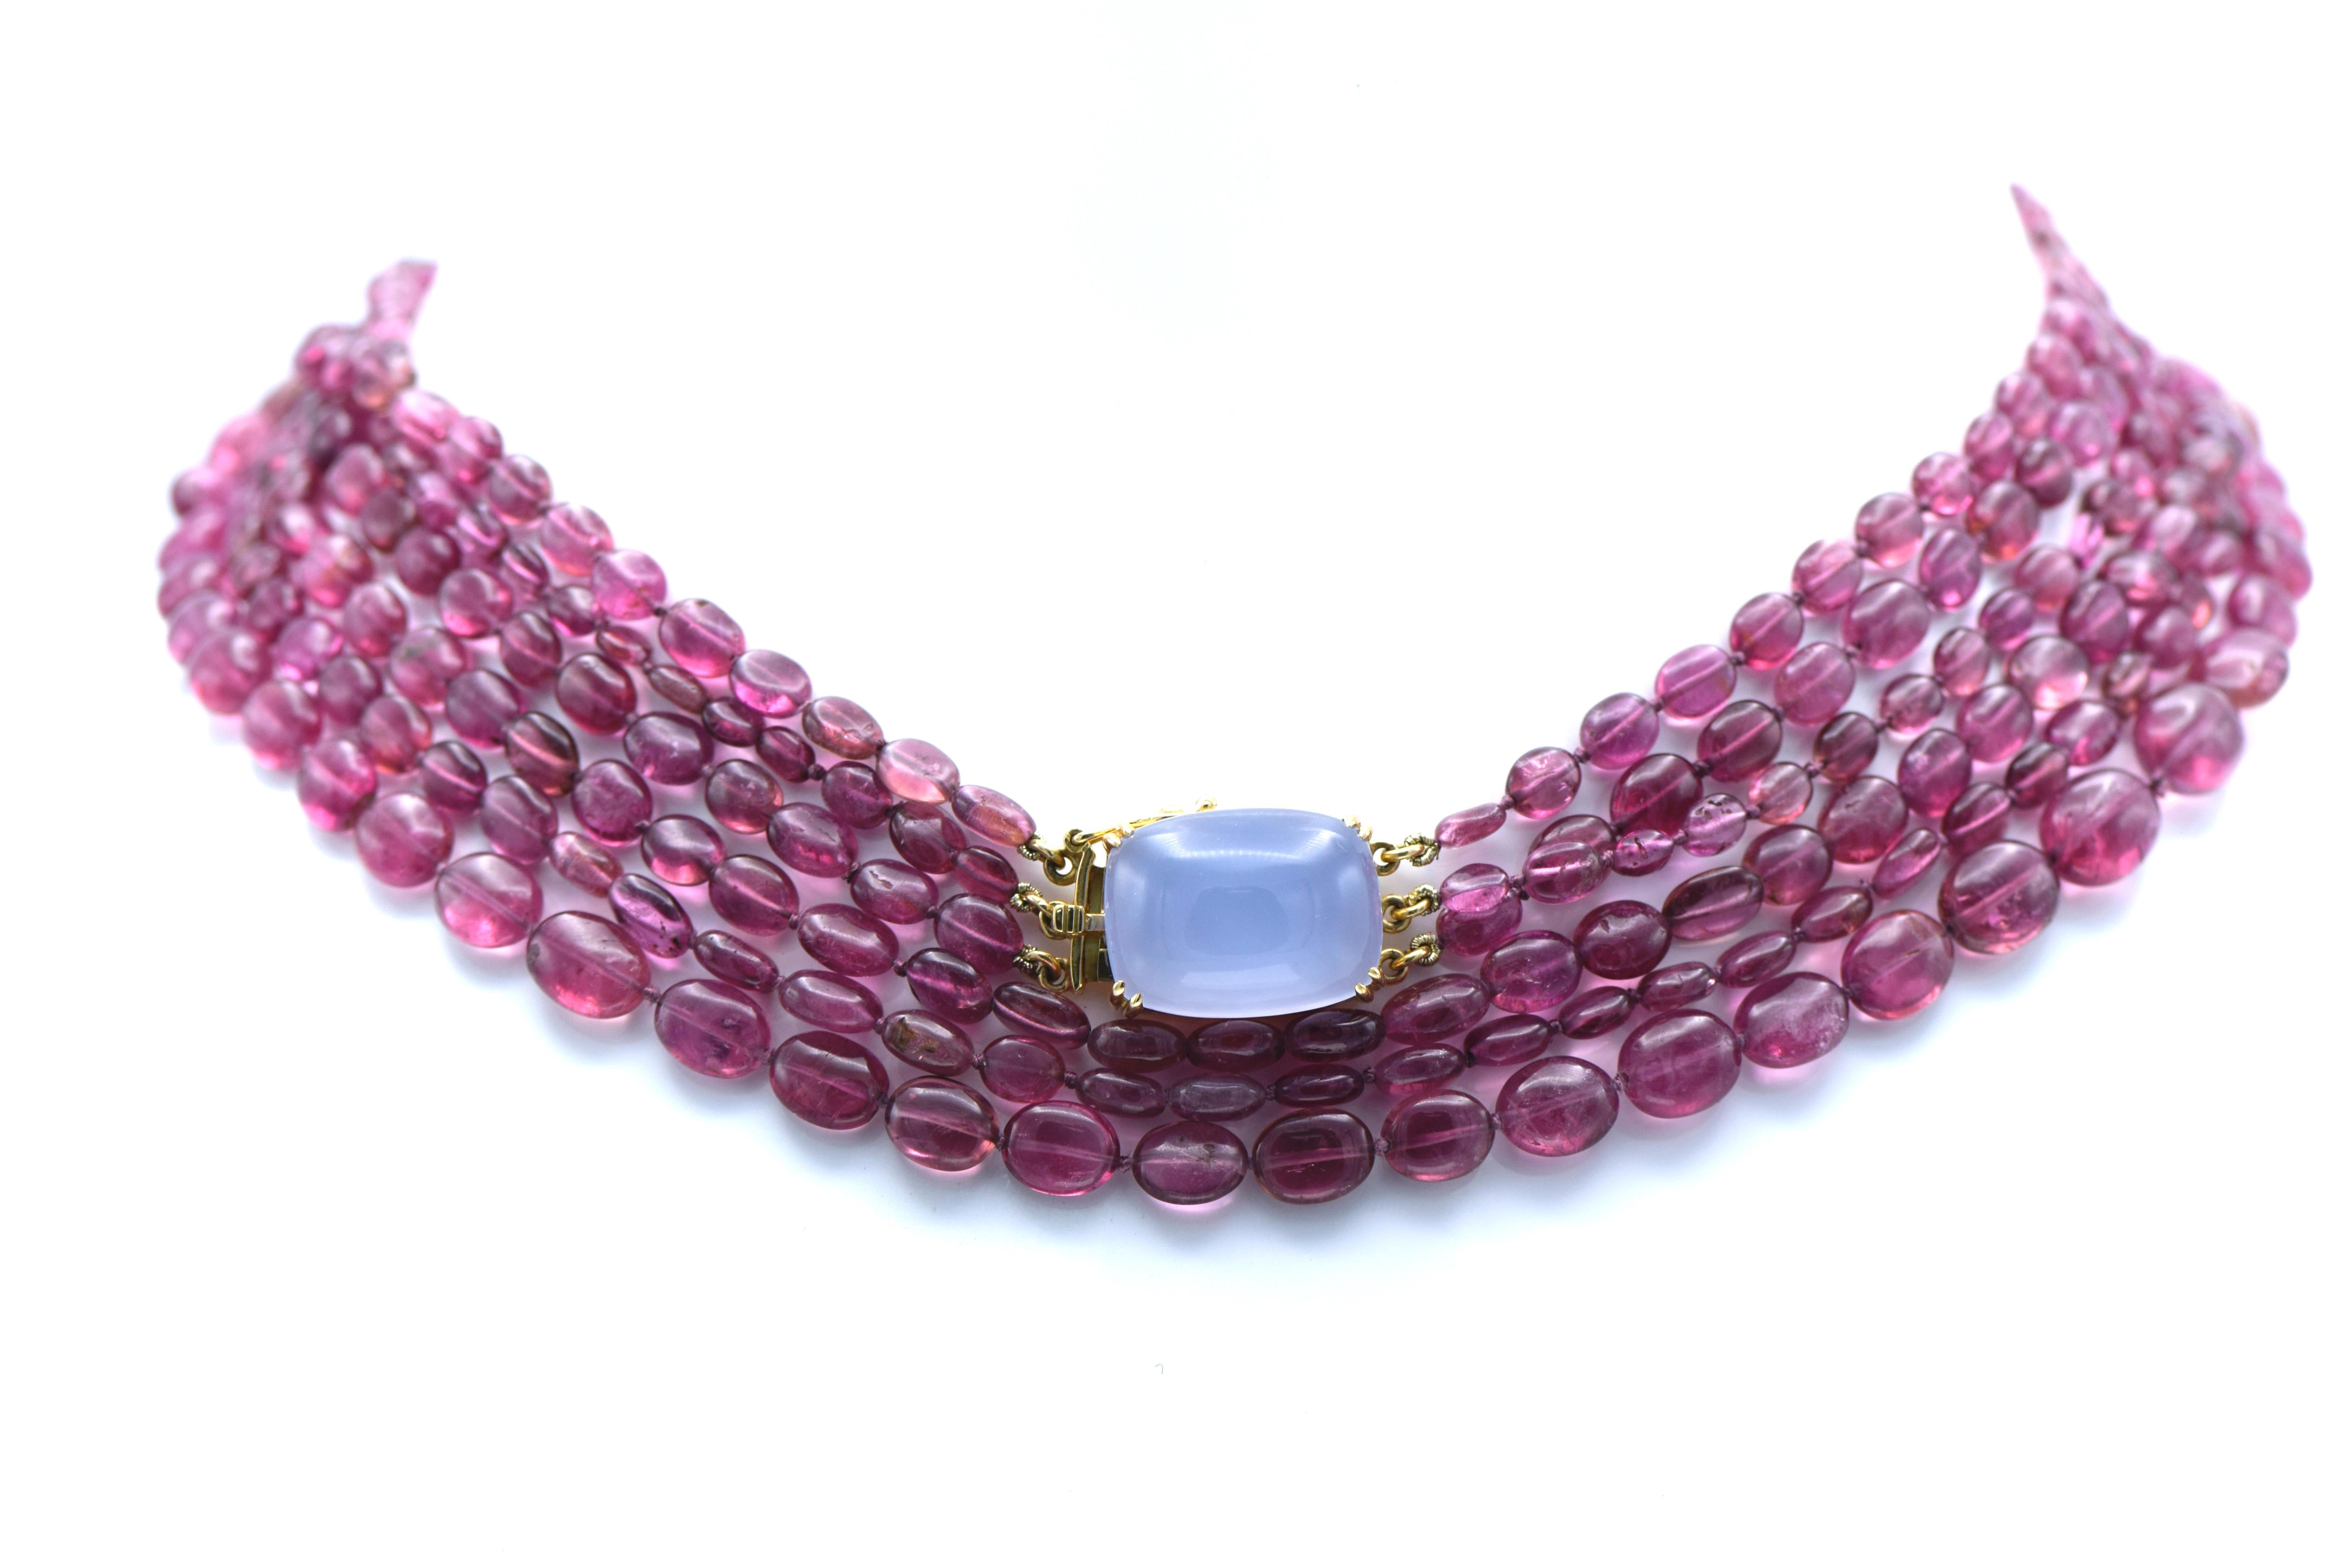 A necklace consisting of 3 strands of pink Tourmaline oval beads ranging from 9.5 x 8.5mm to 6.0 x 4.0mm measuring approximately 36